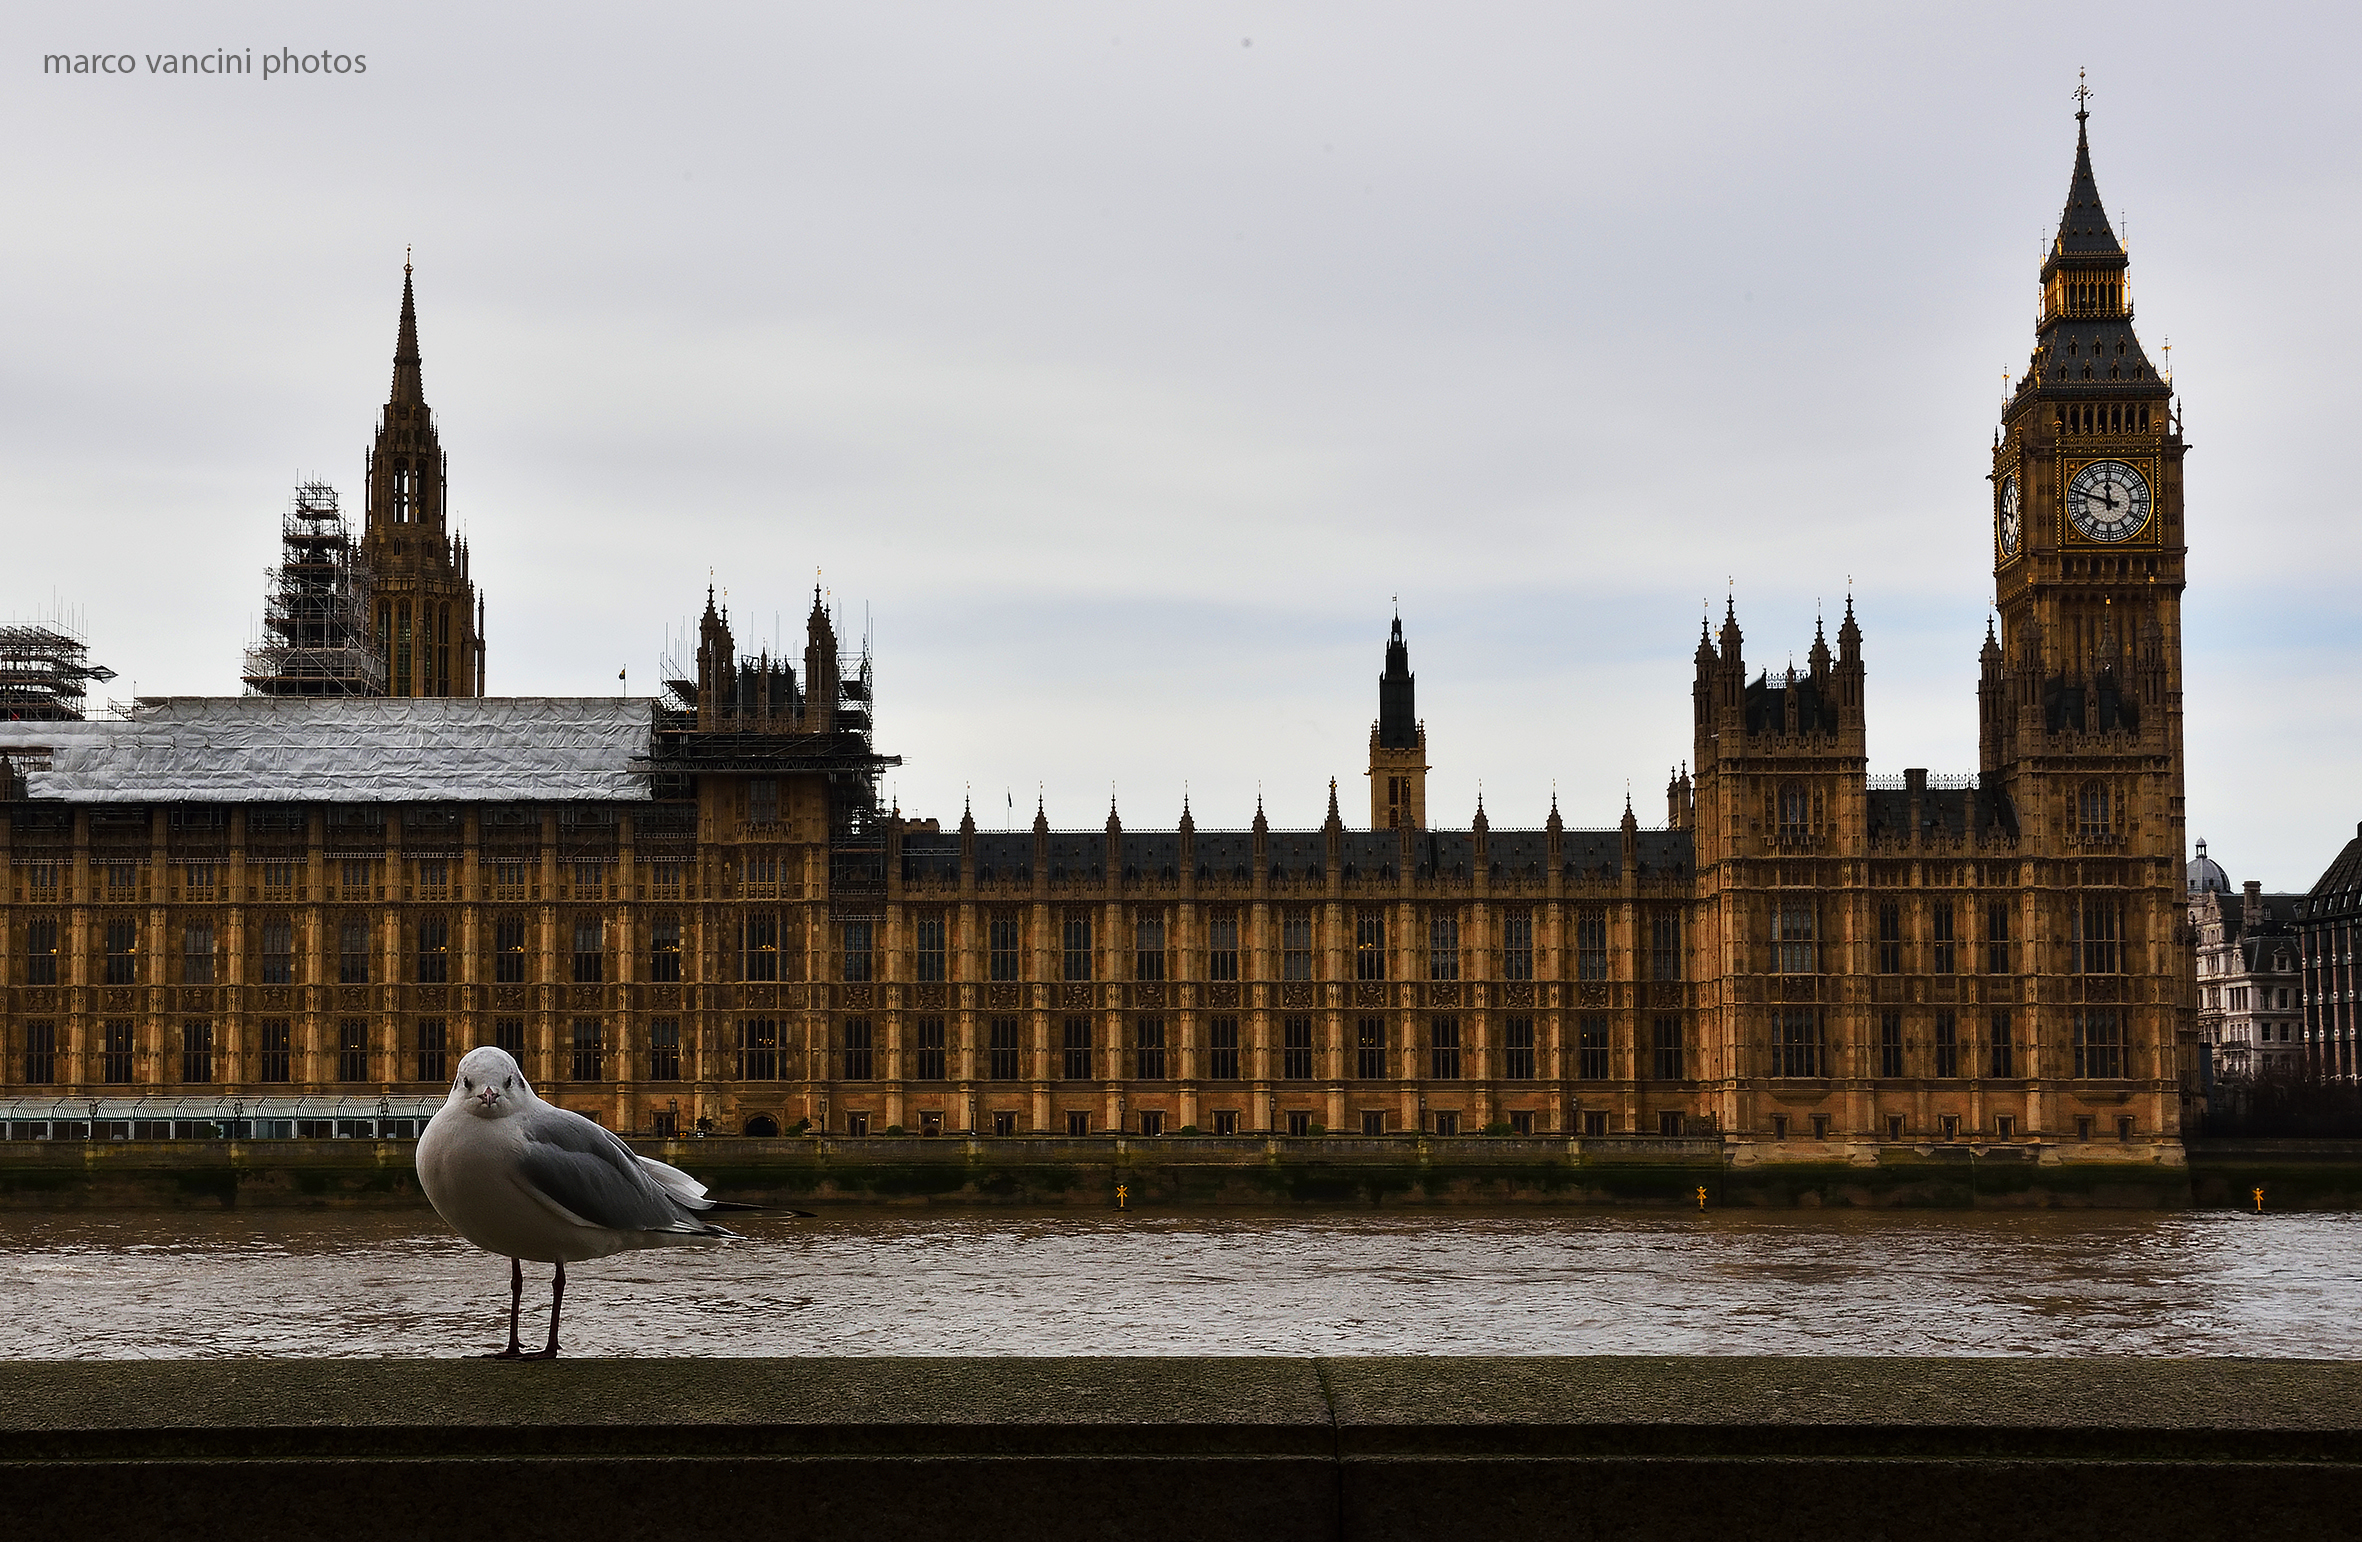 the guardian of the palace of westminster...